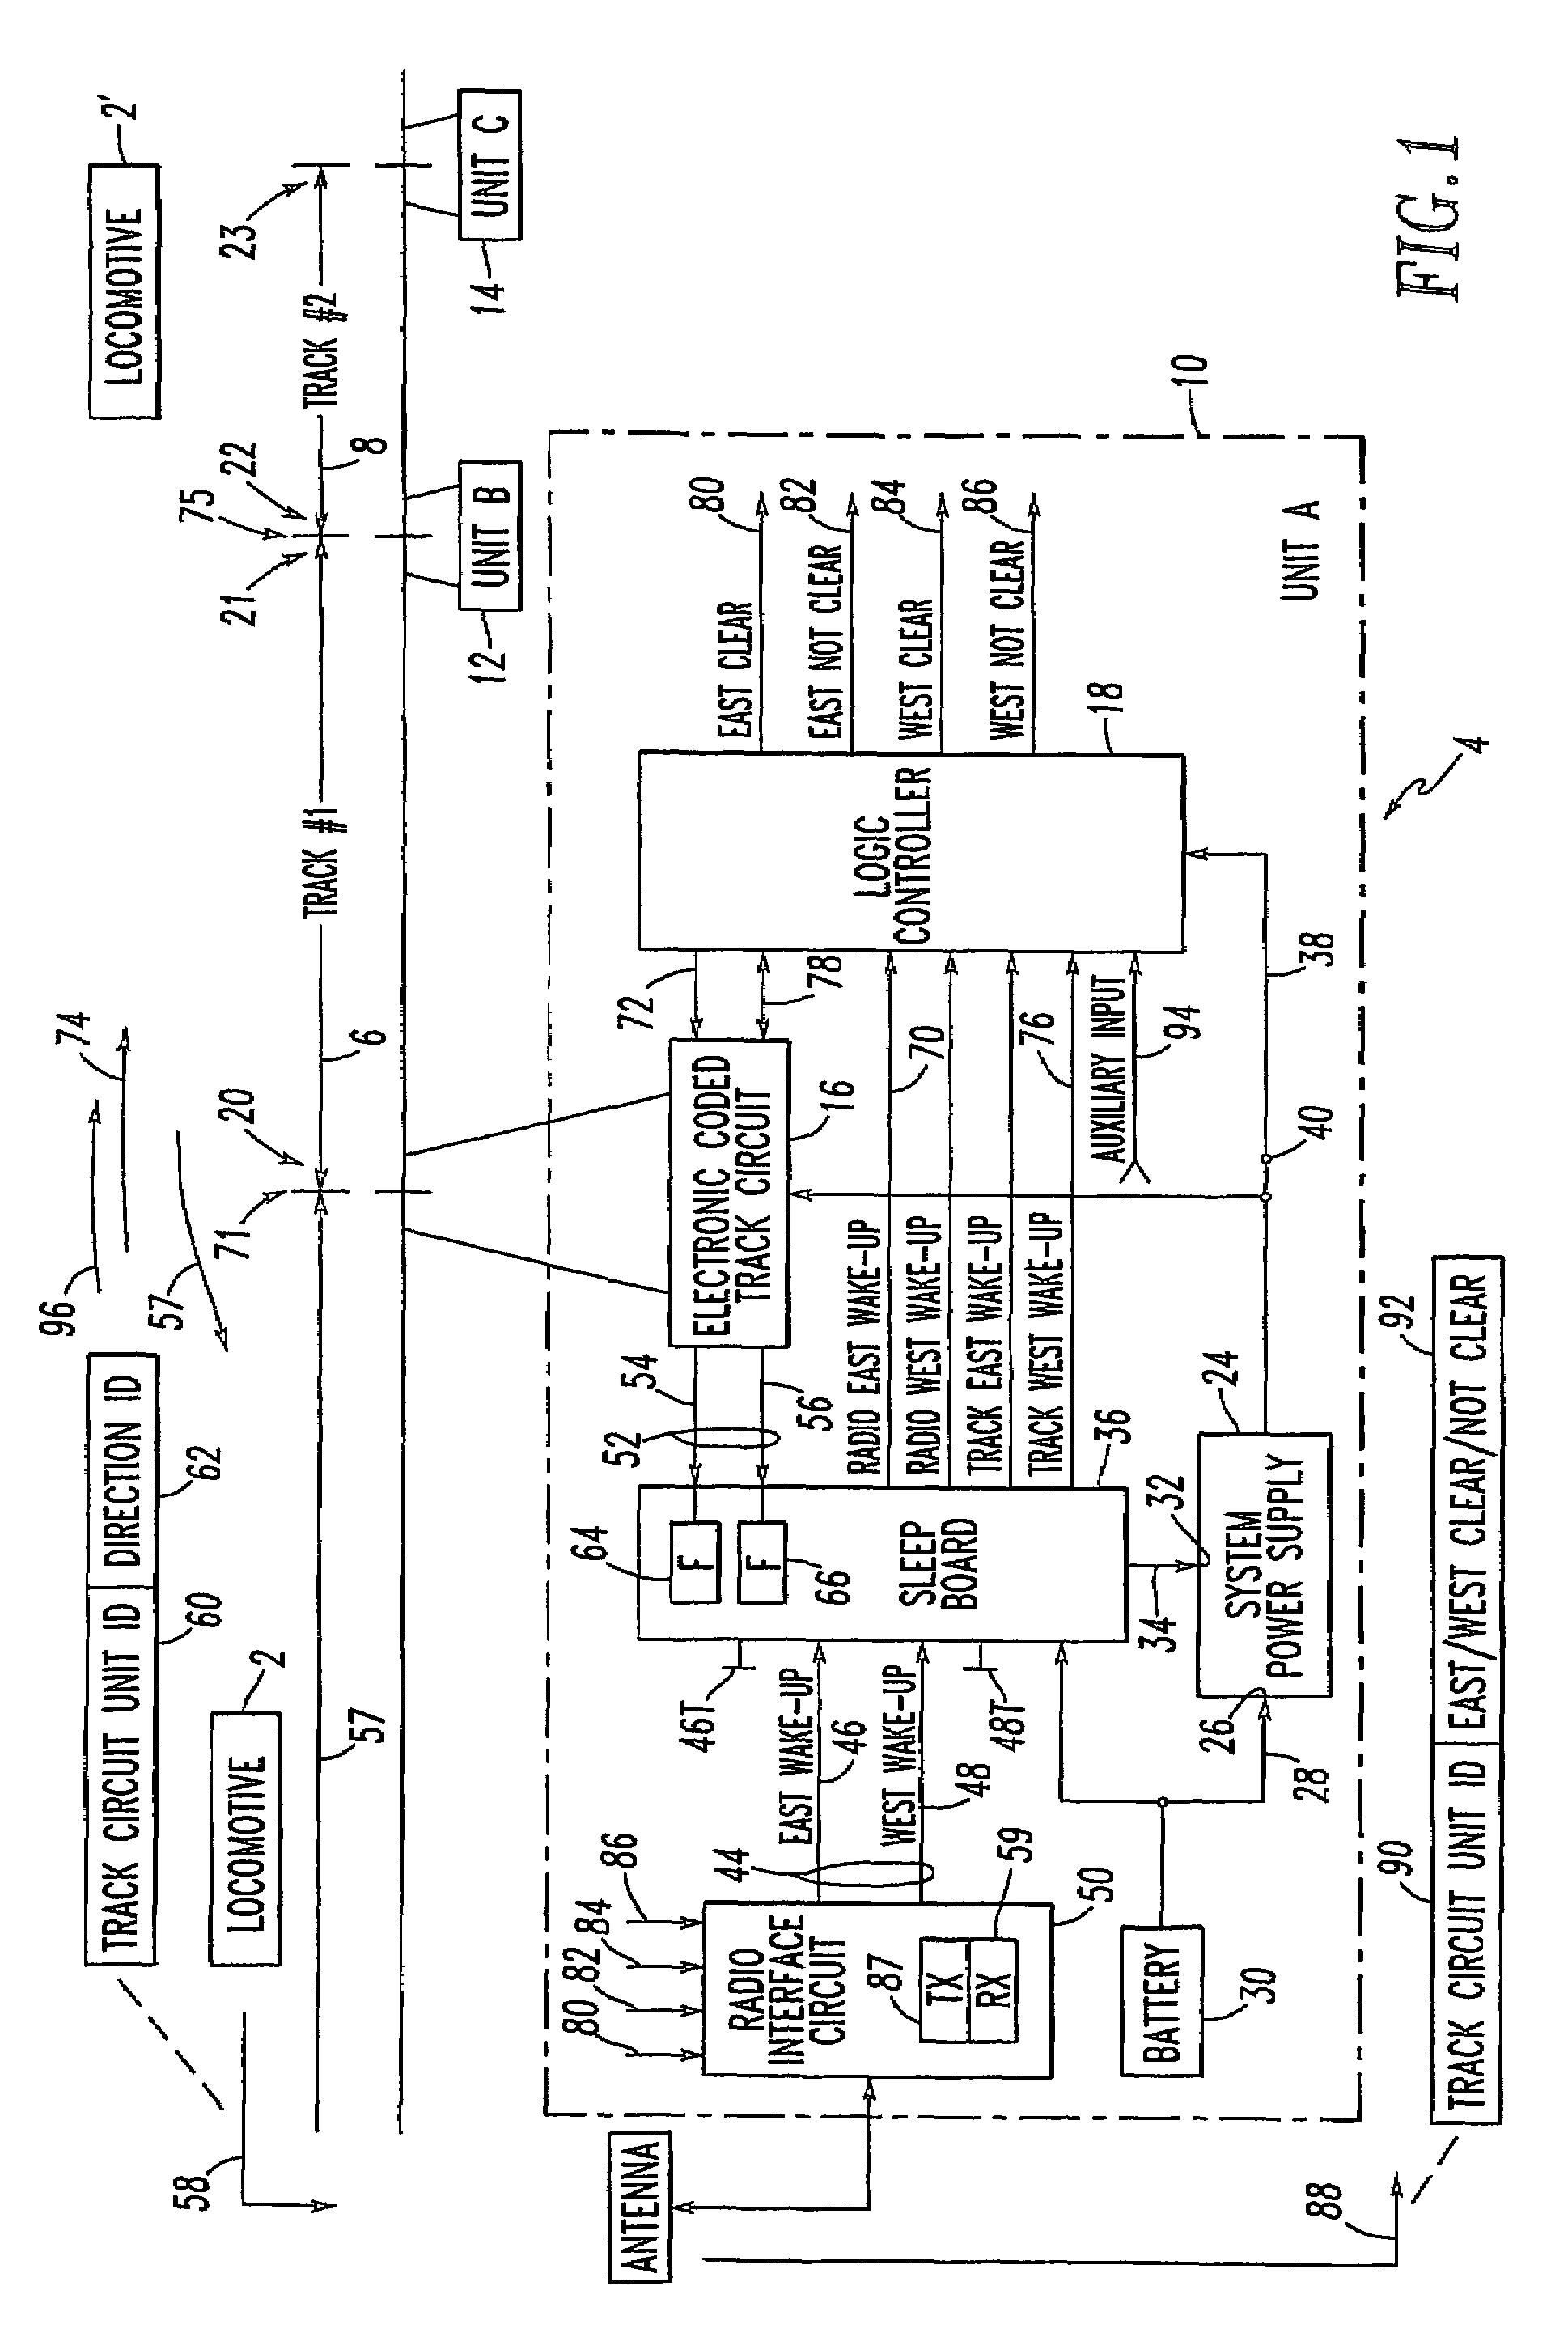 Method and system providing sleep and wake-up modes for railway track circuit unit